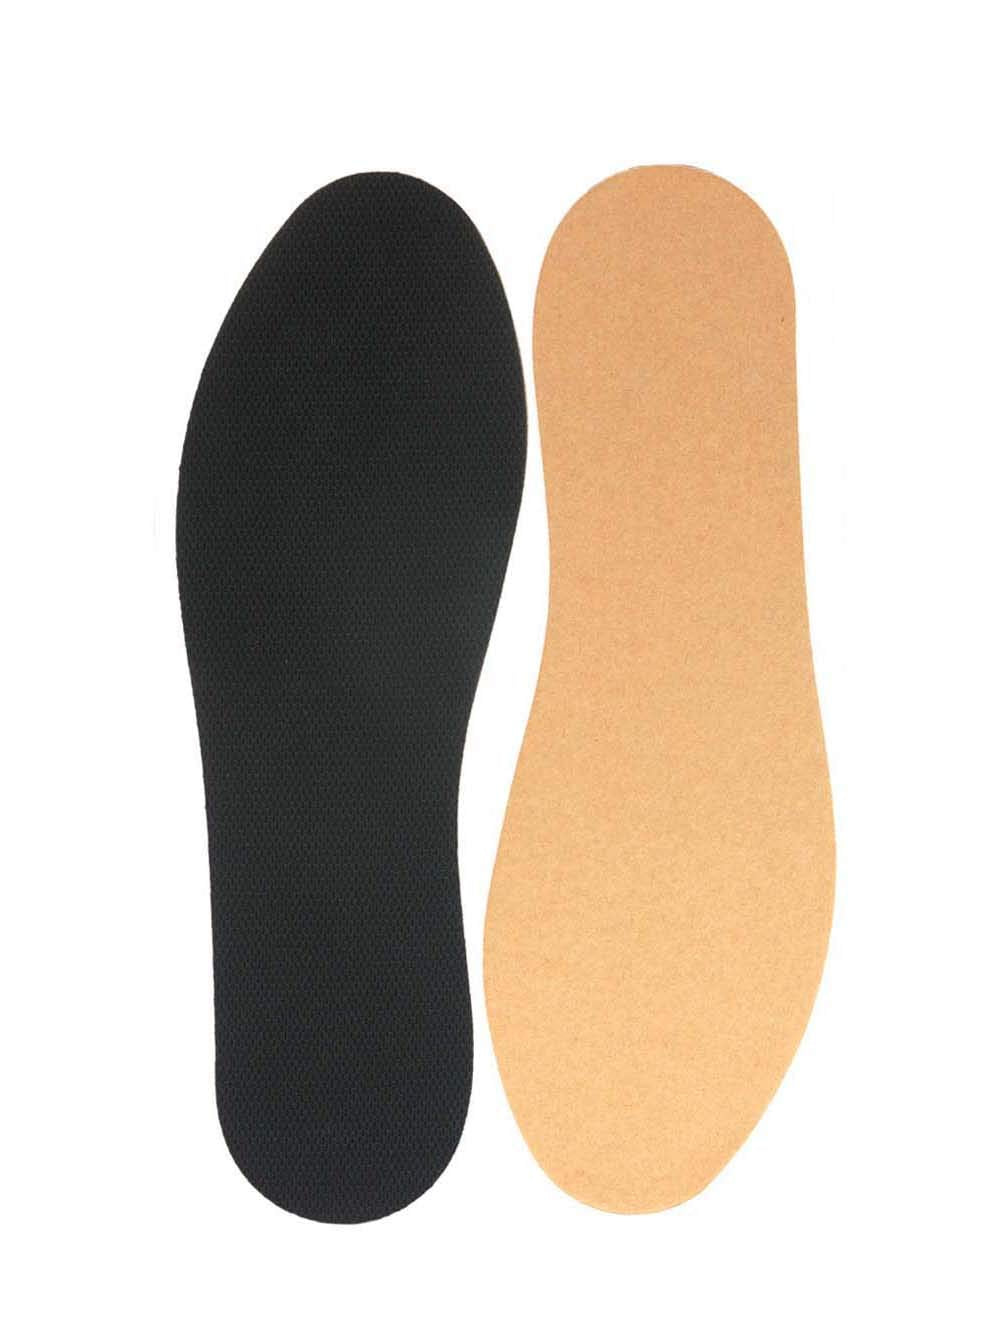 [Australia] - Adhesive Insoles That Absorb Sweat and Always Stay in Place for Sockless Shoes (Women's 8.5-9, Men's 7-7.5(245mm)) Women's 8.5-9, Men's 7-7.5(245mm) 